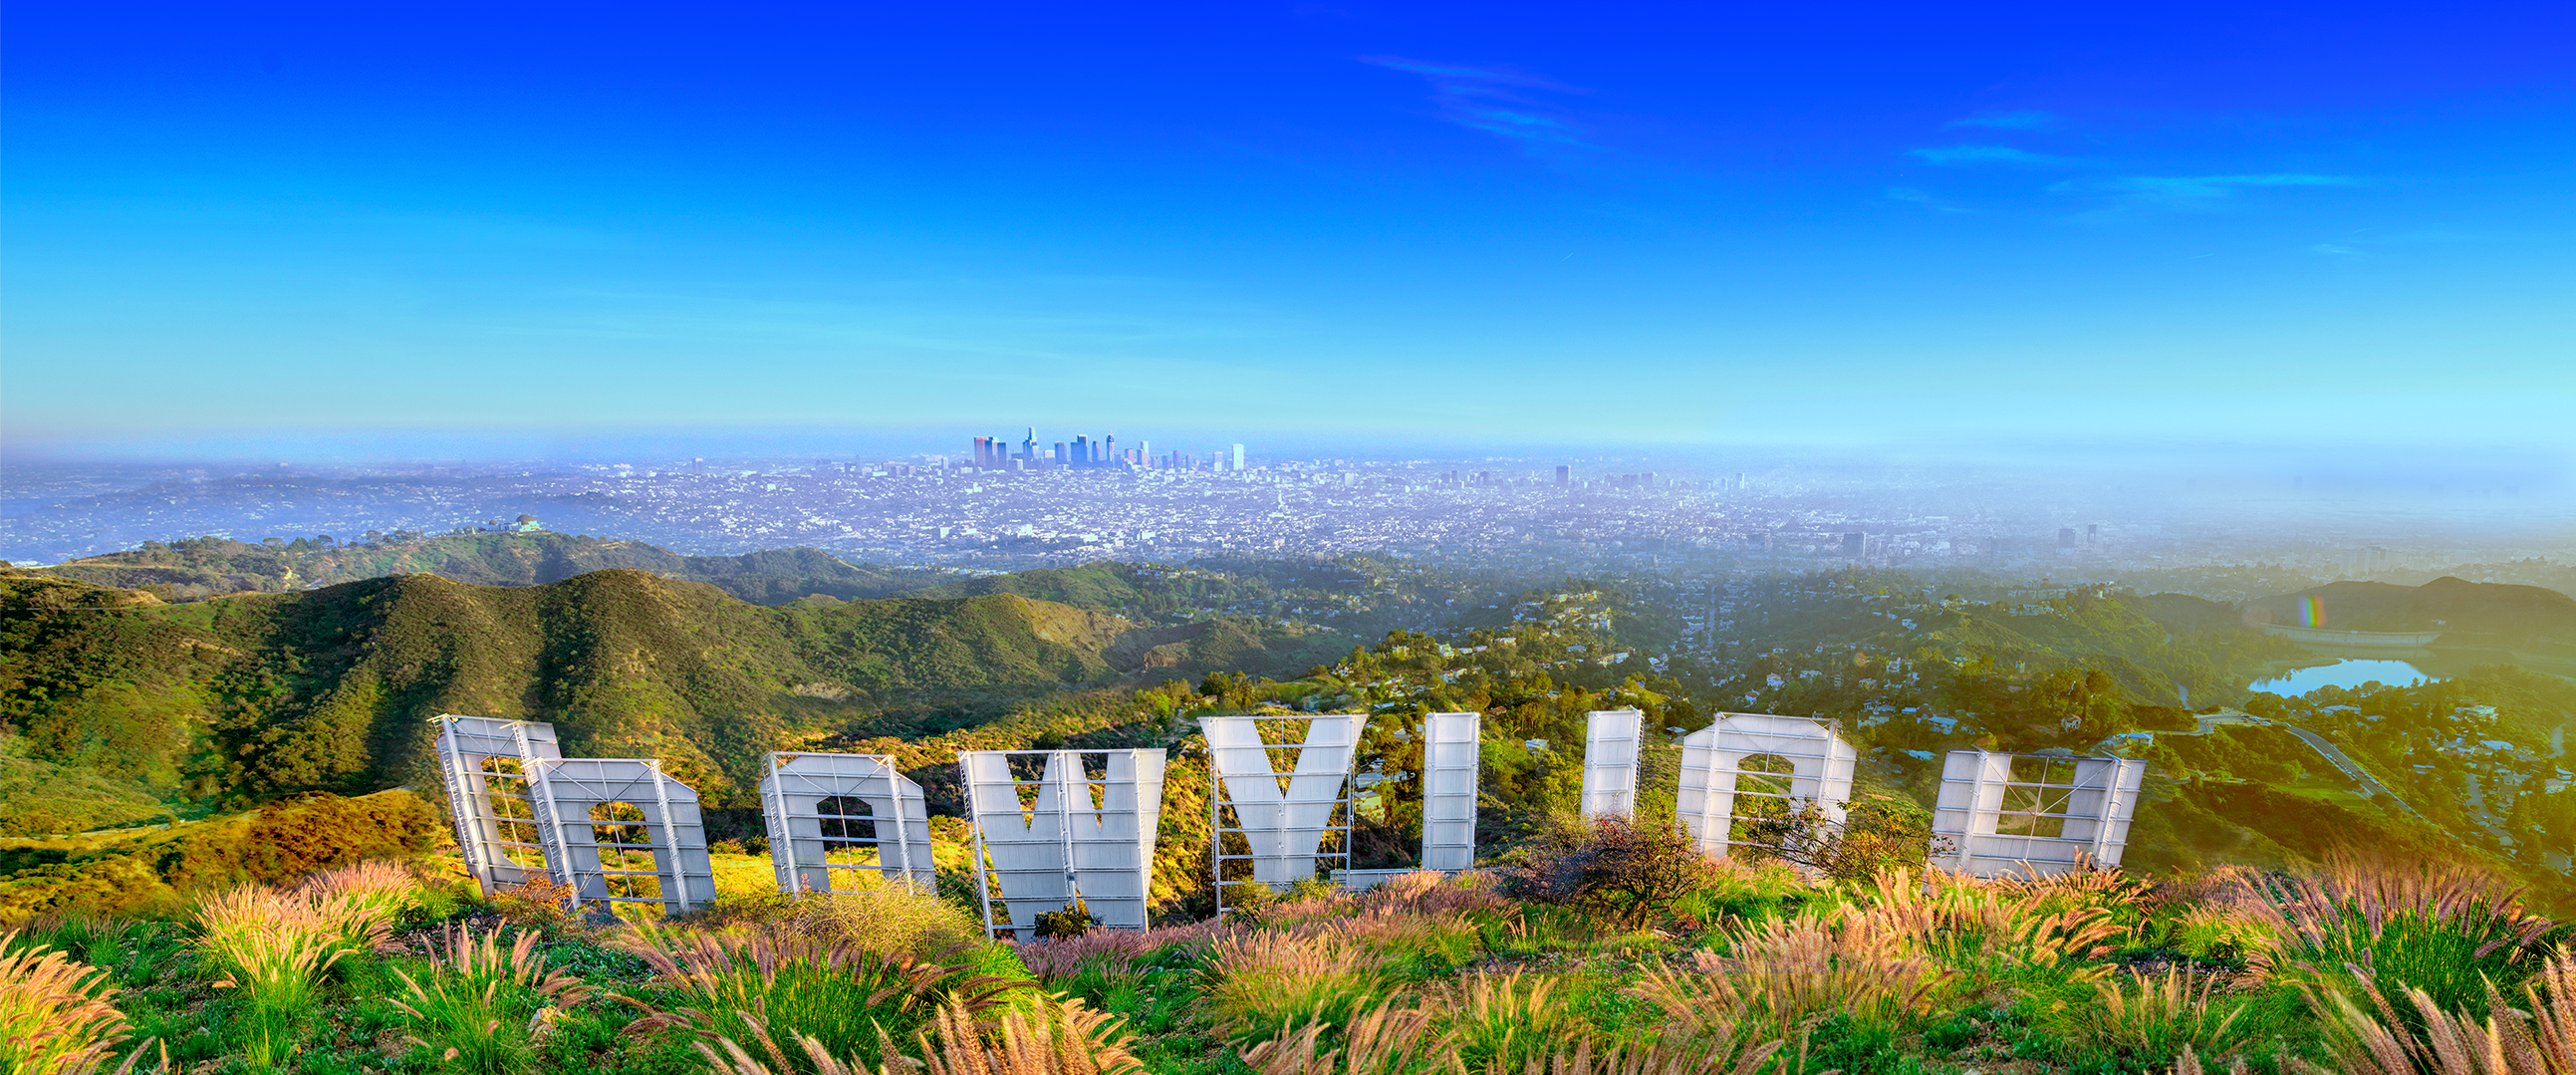 LA Angeles gears up to host IPW; estimated to generate USD 5.5bn for future travel